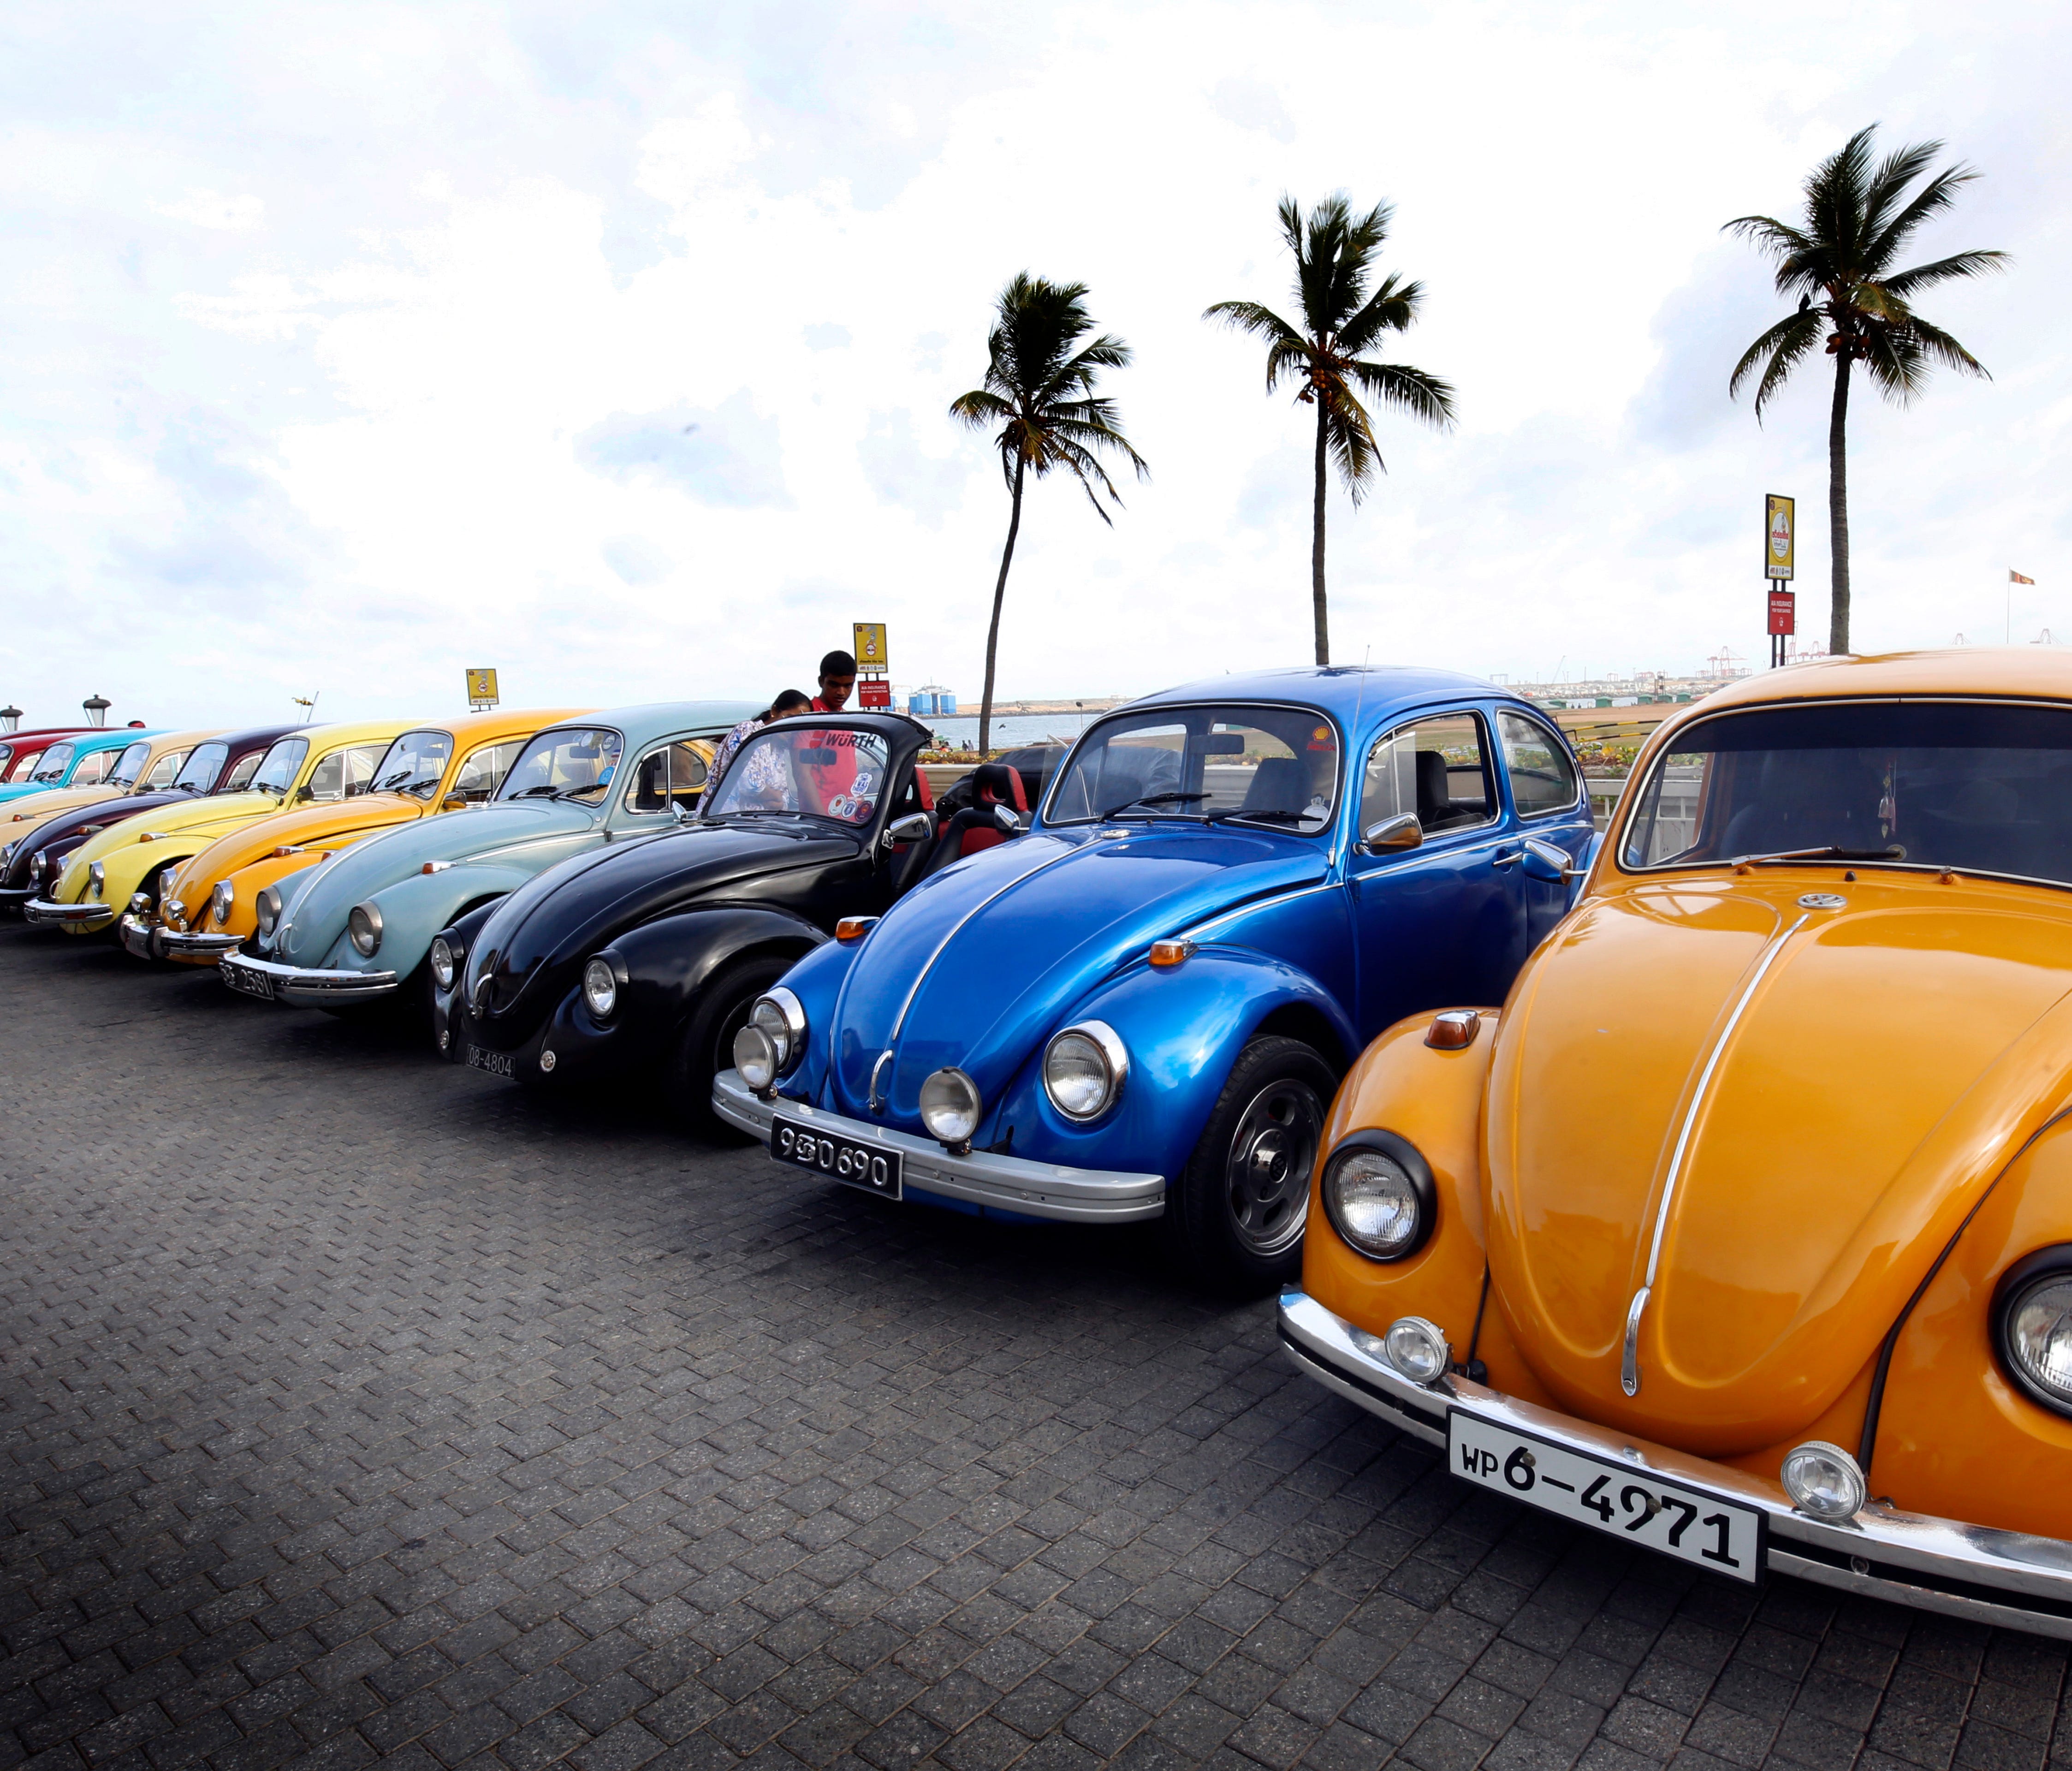 Classic and custom-built Volkswagen cars in Sri Lanka since the early 1950s gather in celebration of the World Volkswagen Day at Hotel Galle Face last week